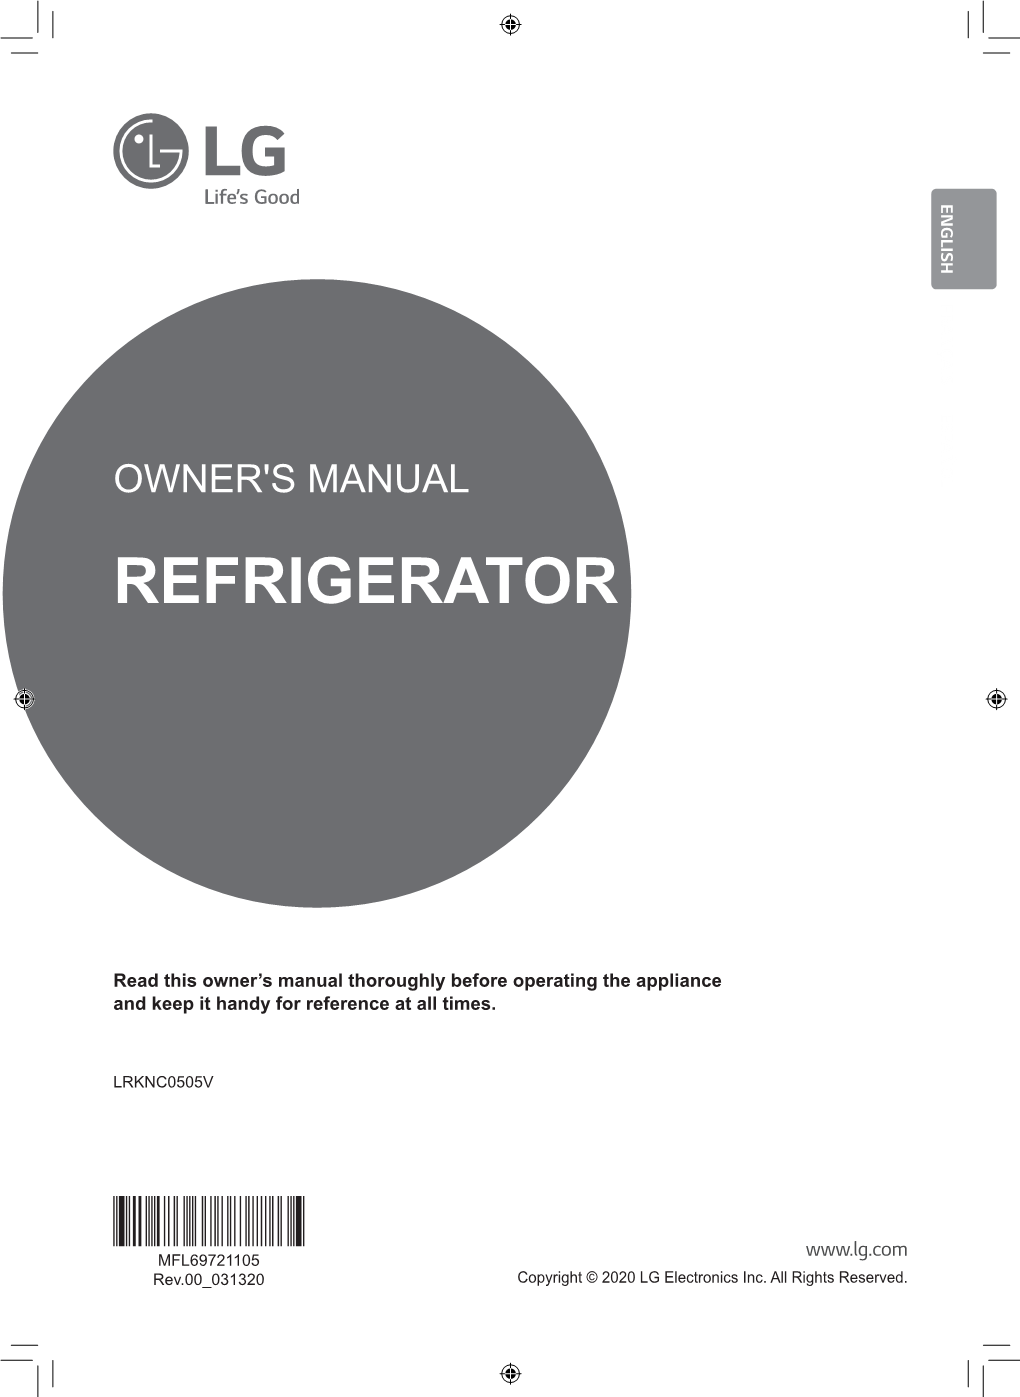 Refrigerator Owner's Manual Lrknc0505v ﻿ 2 Table of Contents